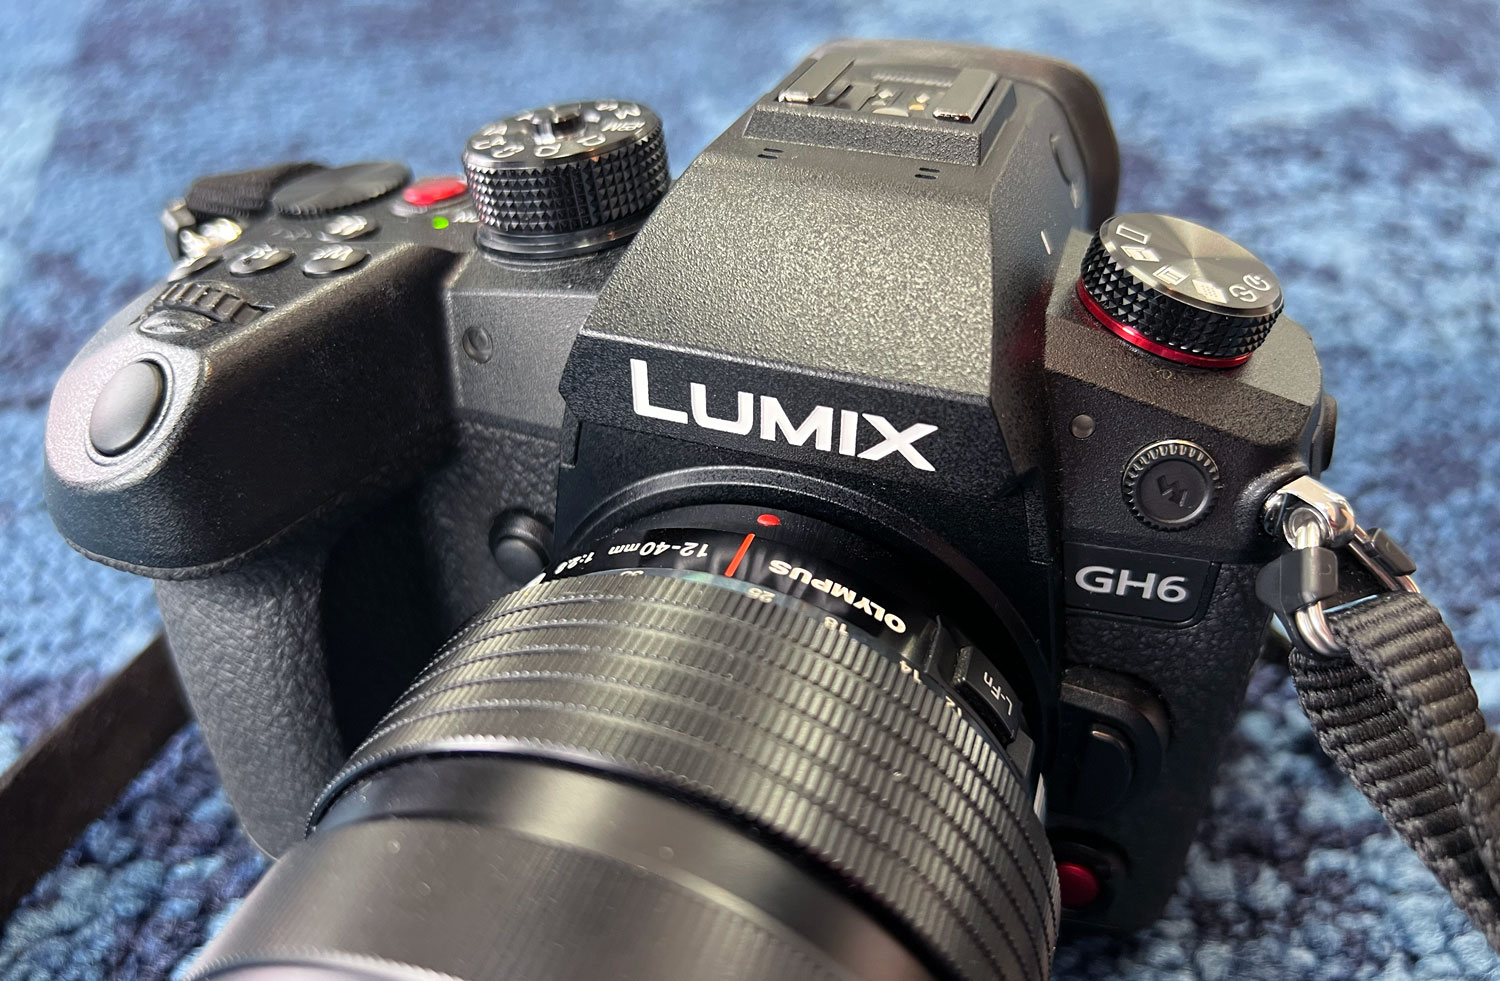 Editie groei filter Review: Panasonic Lumix GH6 by Iain Anderson - ProVideo Coalition